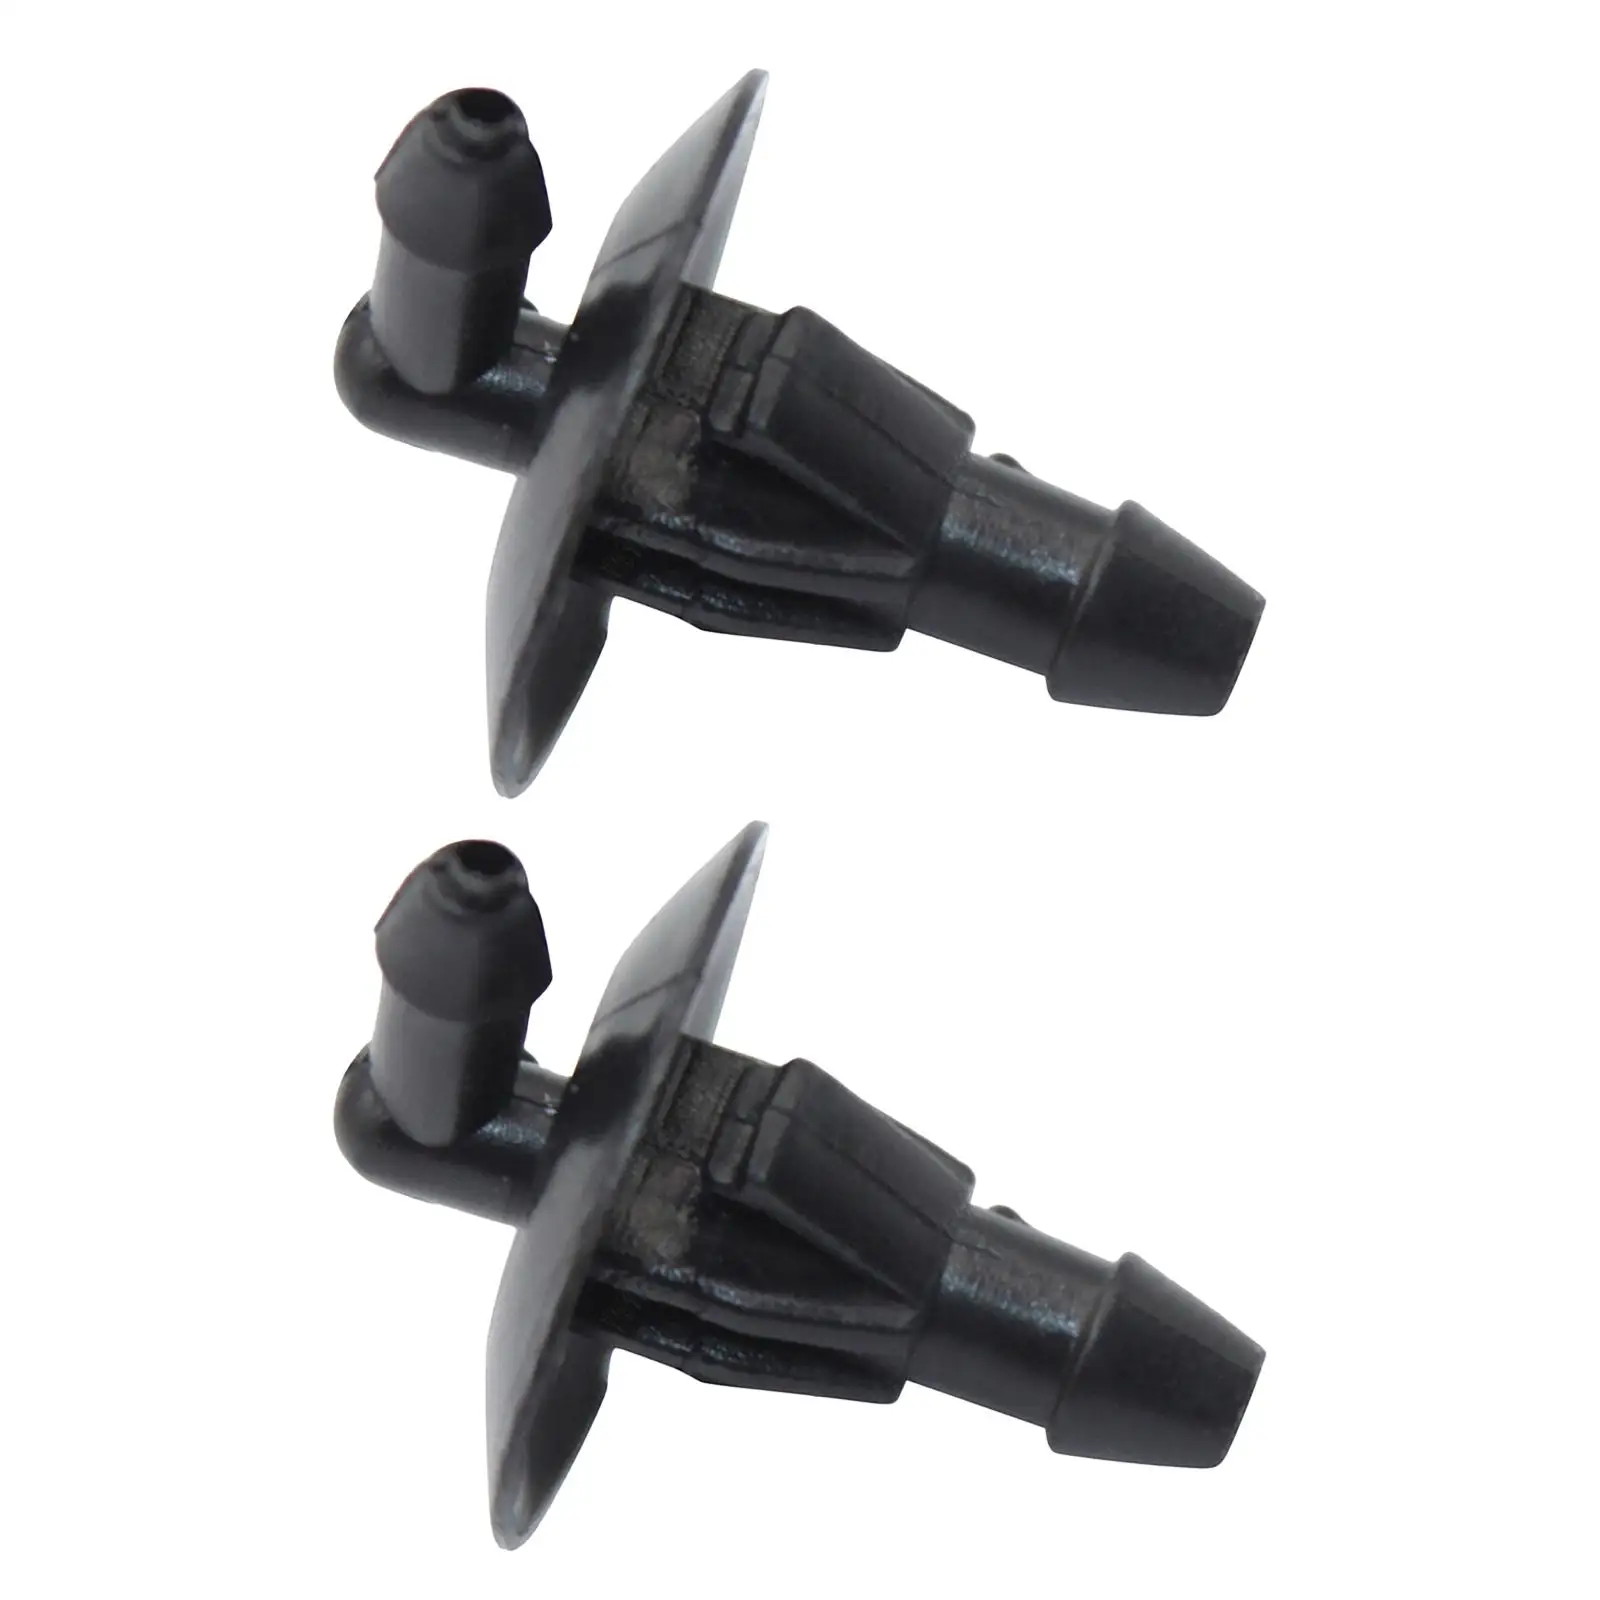 2 Pieces Windshield Washer Nozzle Replace for Dodge Sprinter 2500 3500